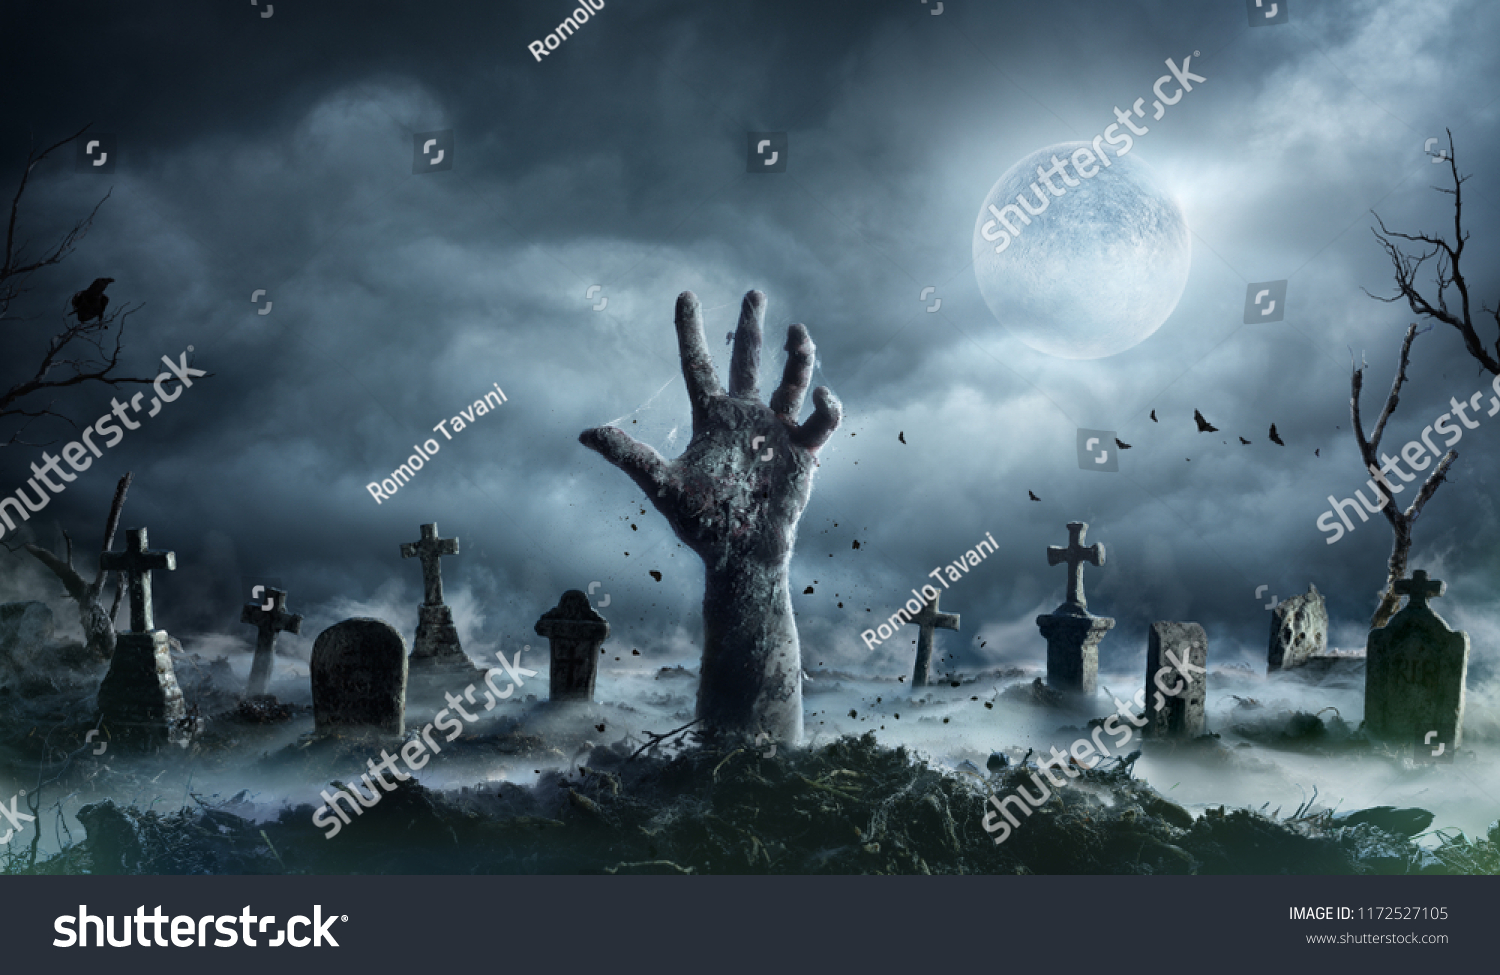 stock-photo-zombie-hand-rising-out-of-a-